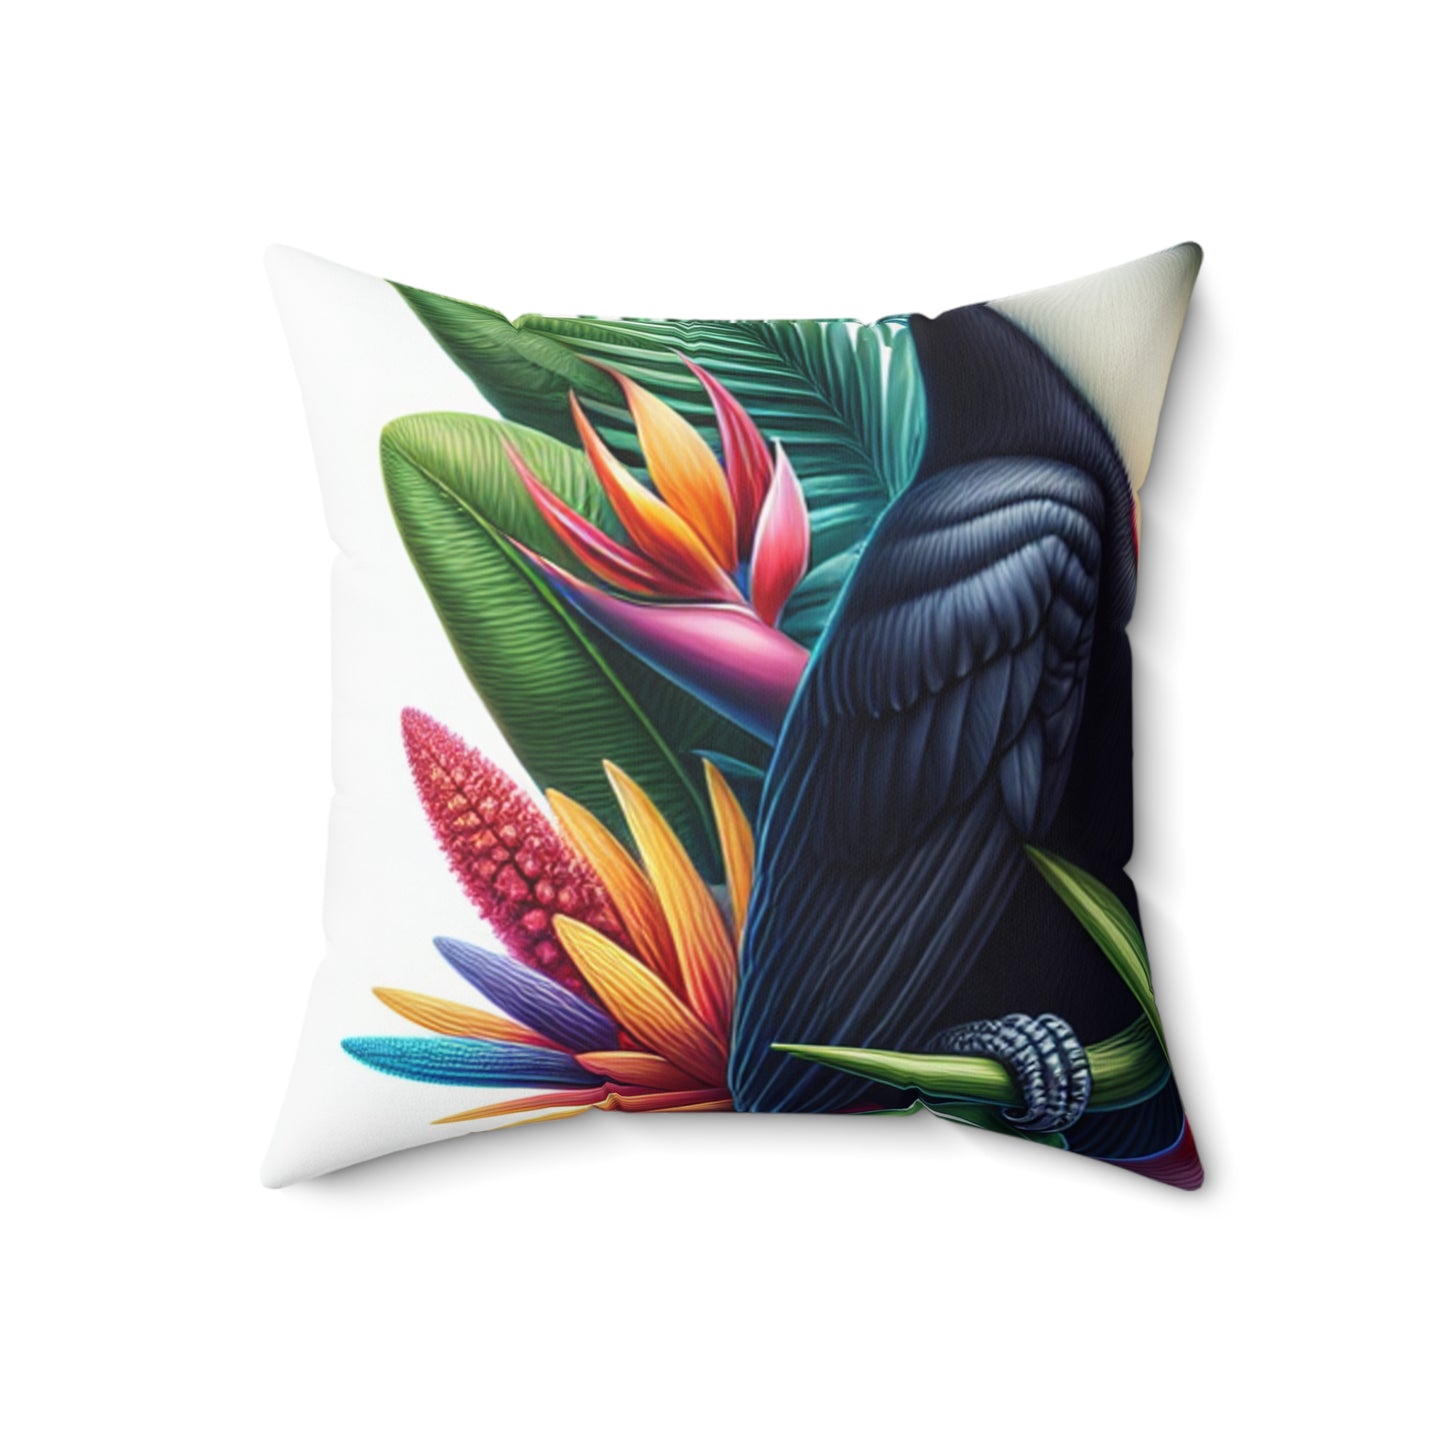 "Toucan on a Tropical Bloom" - The Alien Spun Polyester Square Pillow Hyperrealism Style